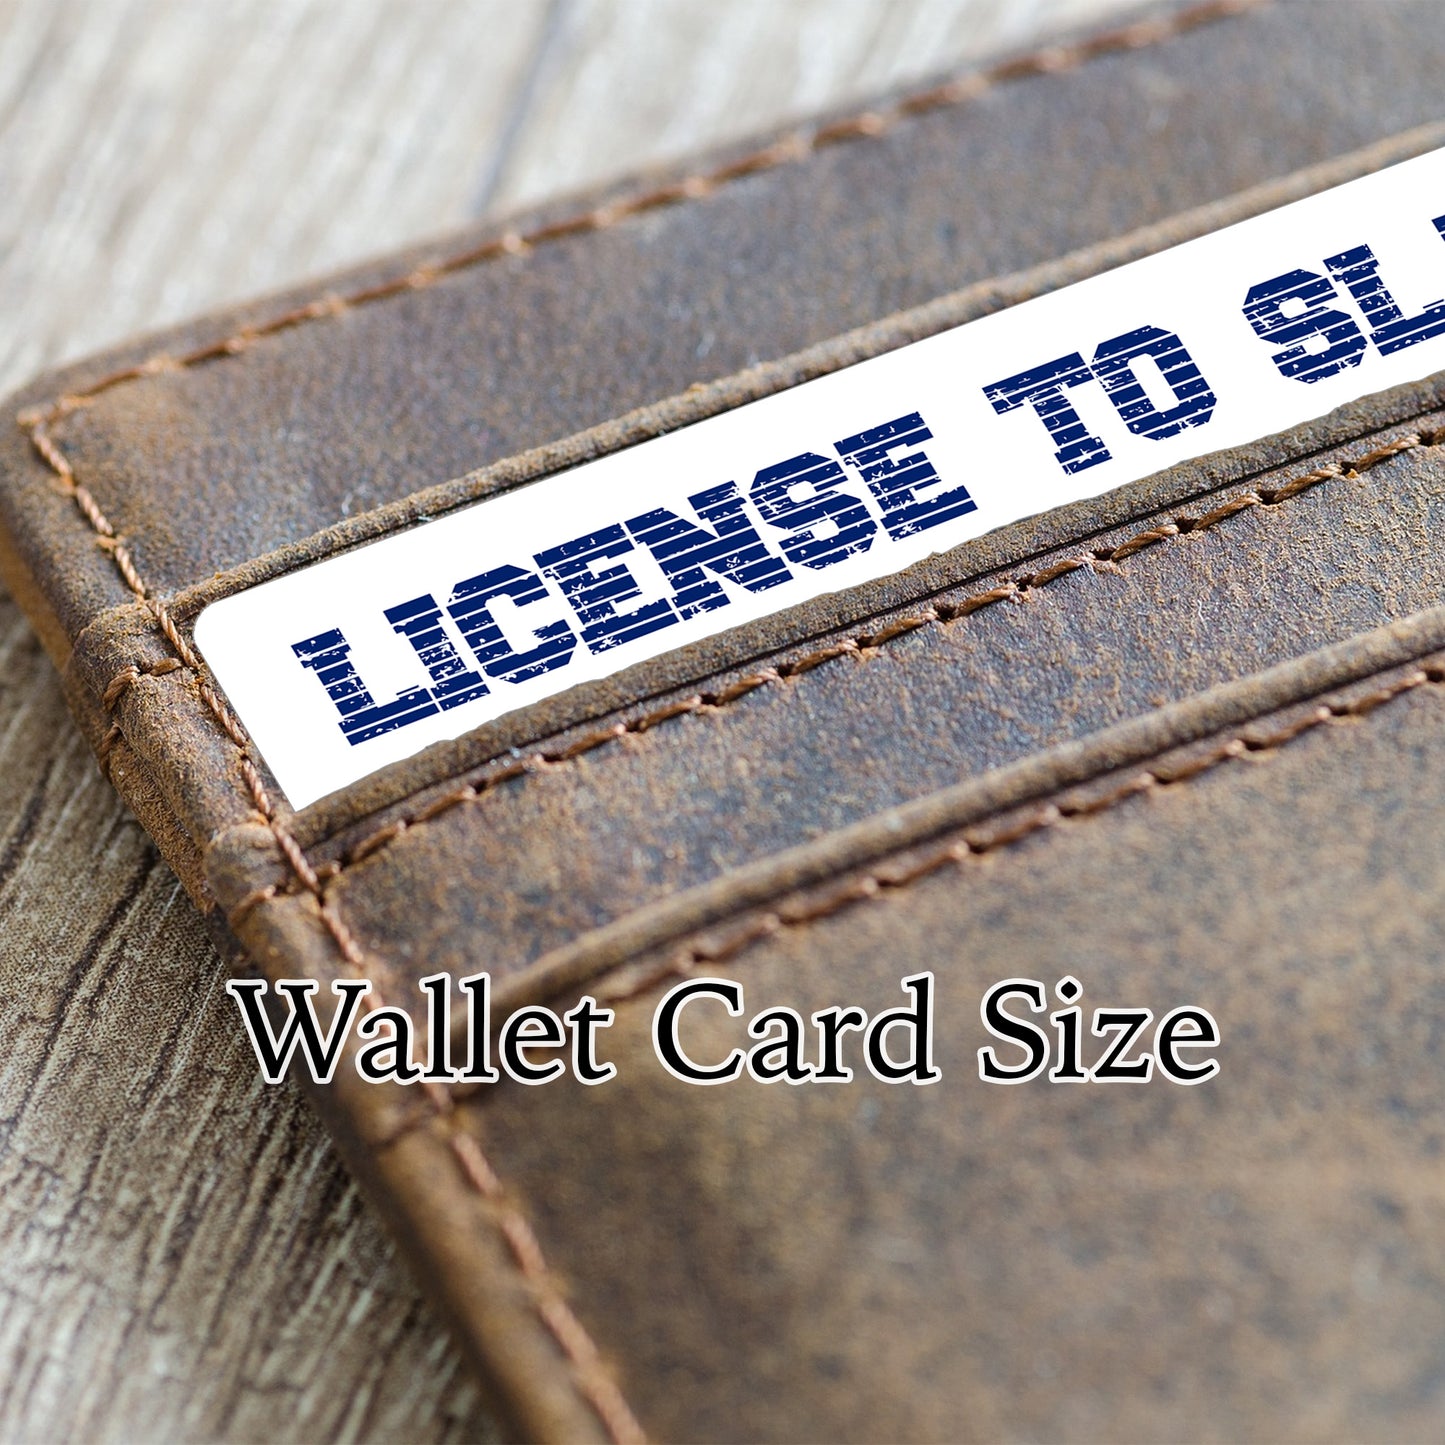 Asexual pride personalised license to slay card